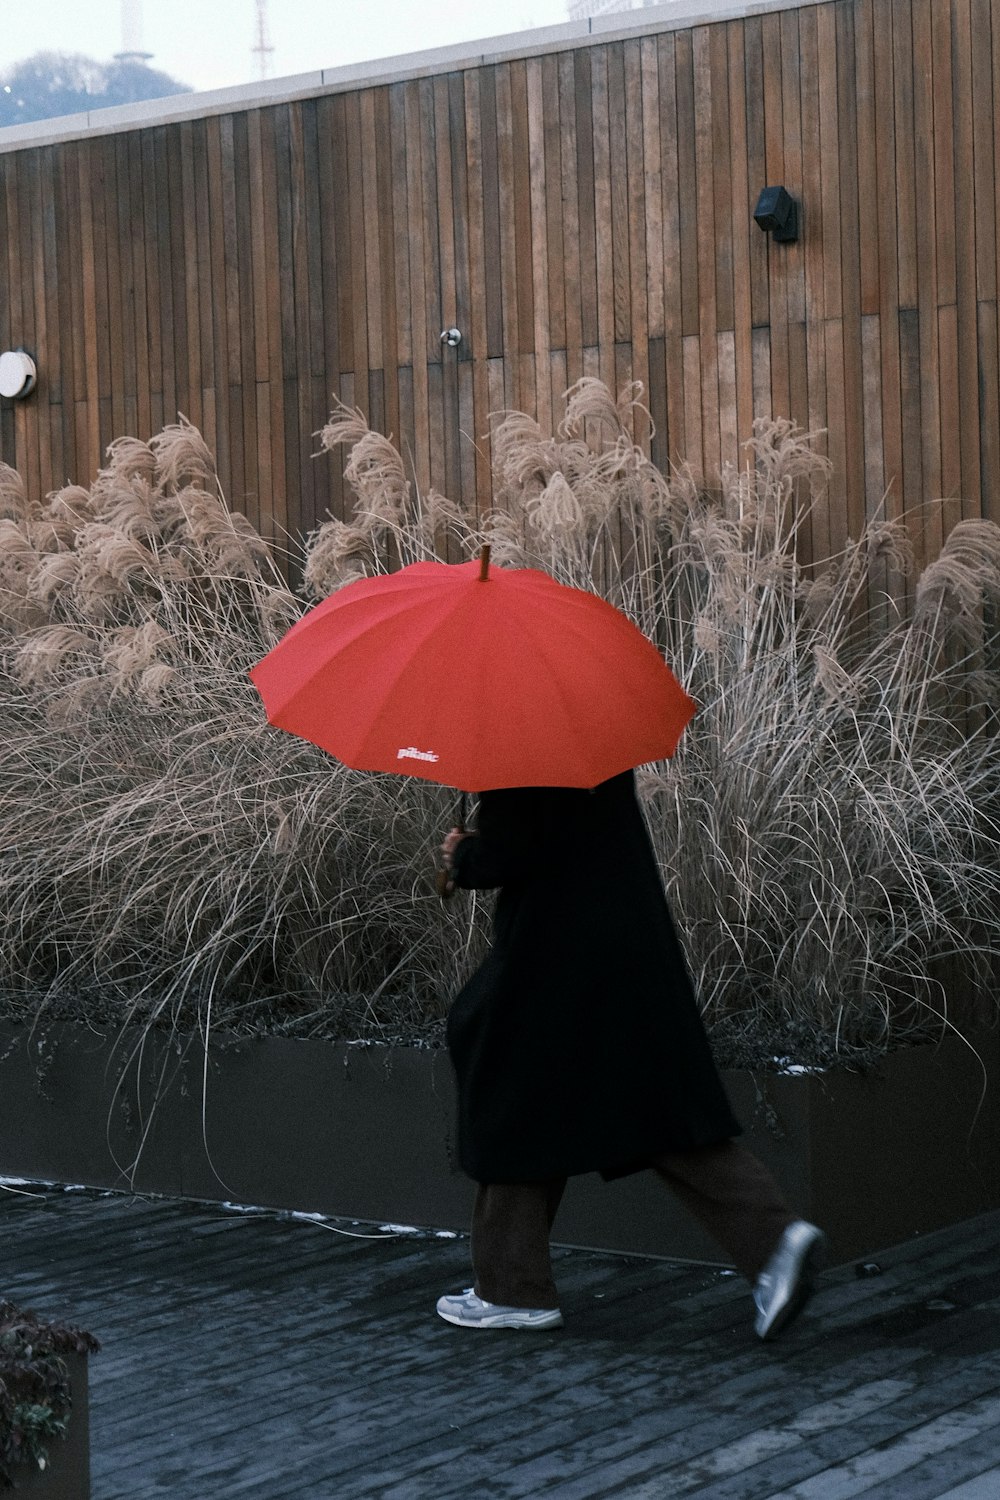 a woman walking down a street holding a red umbrella